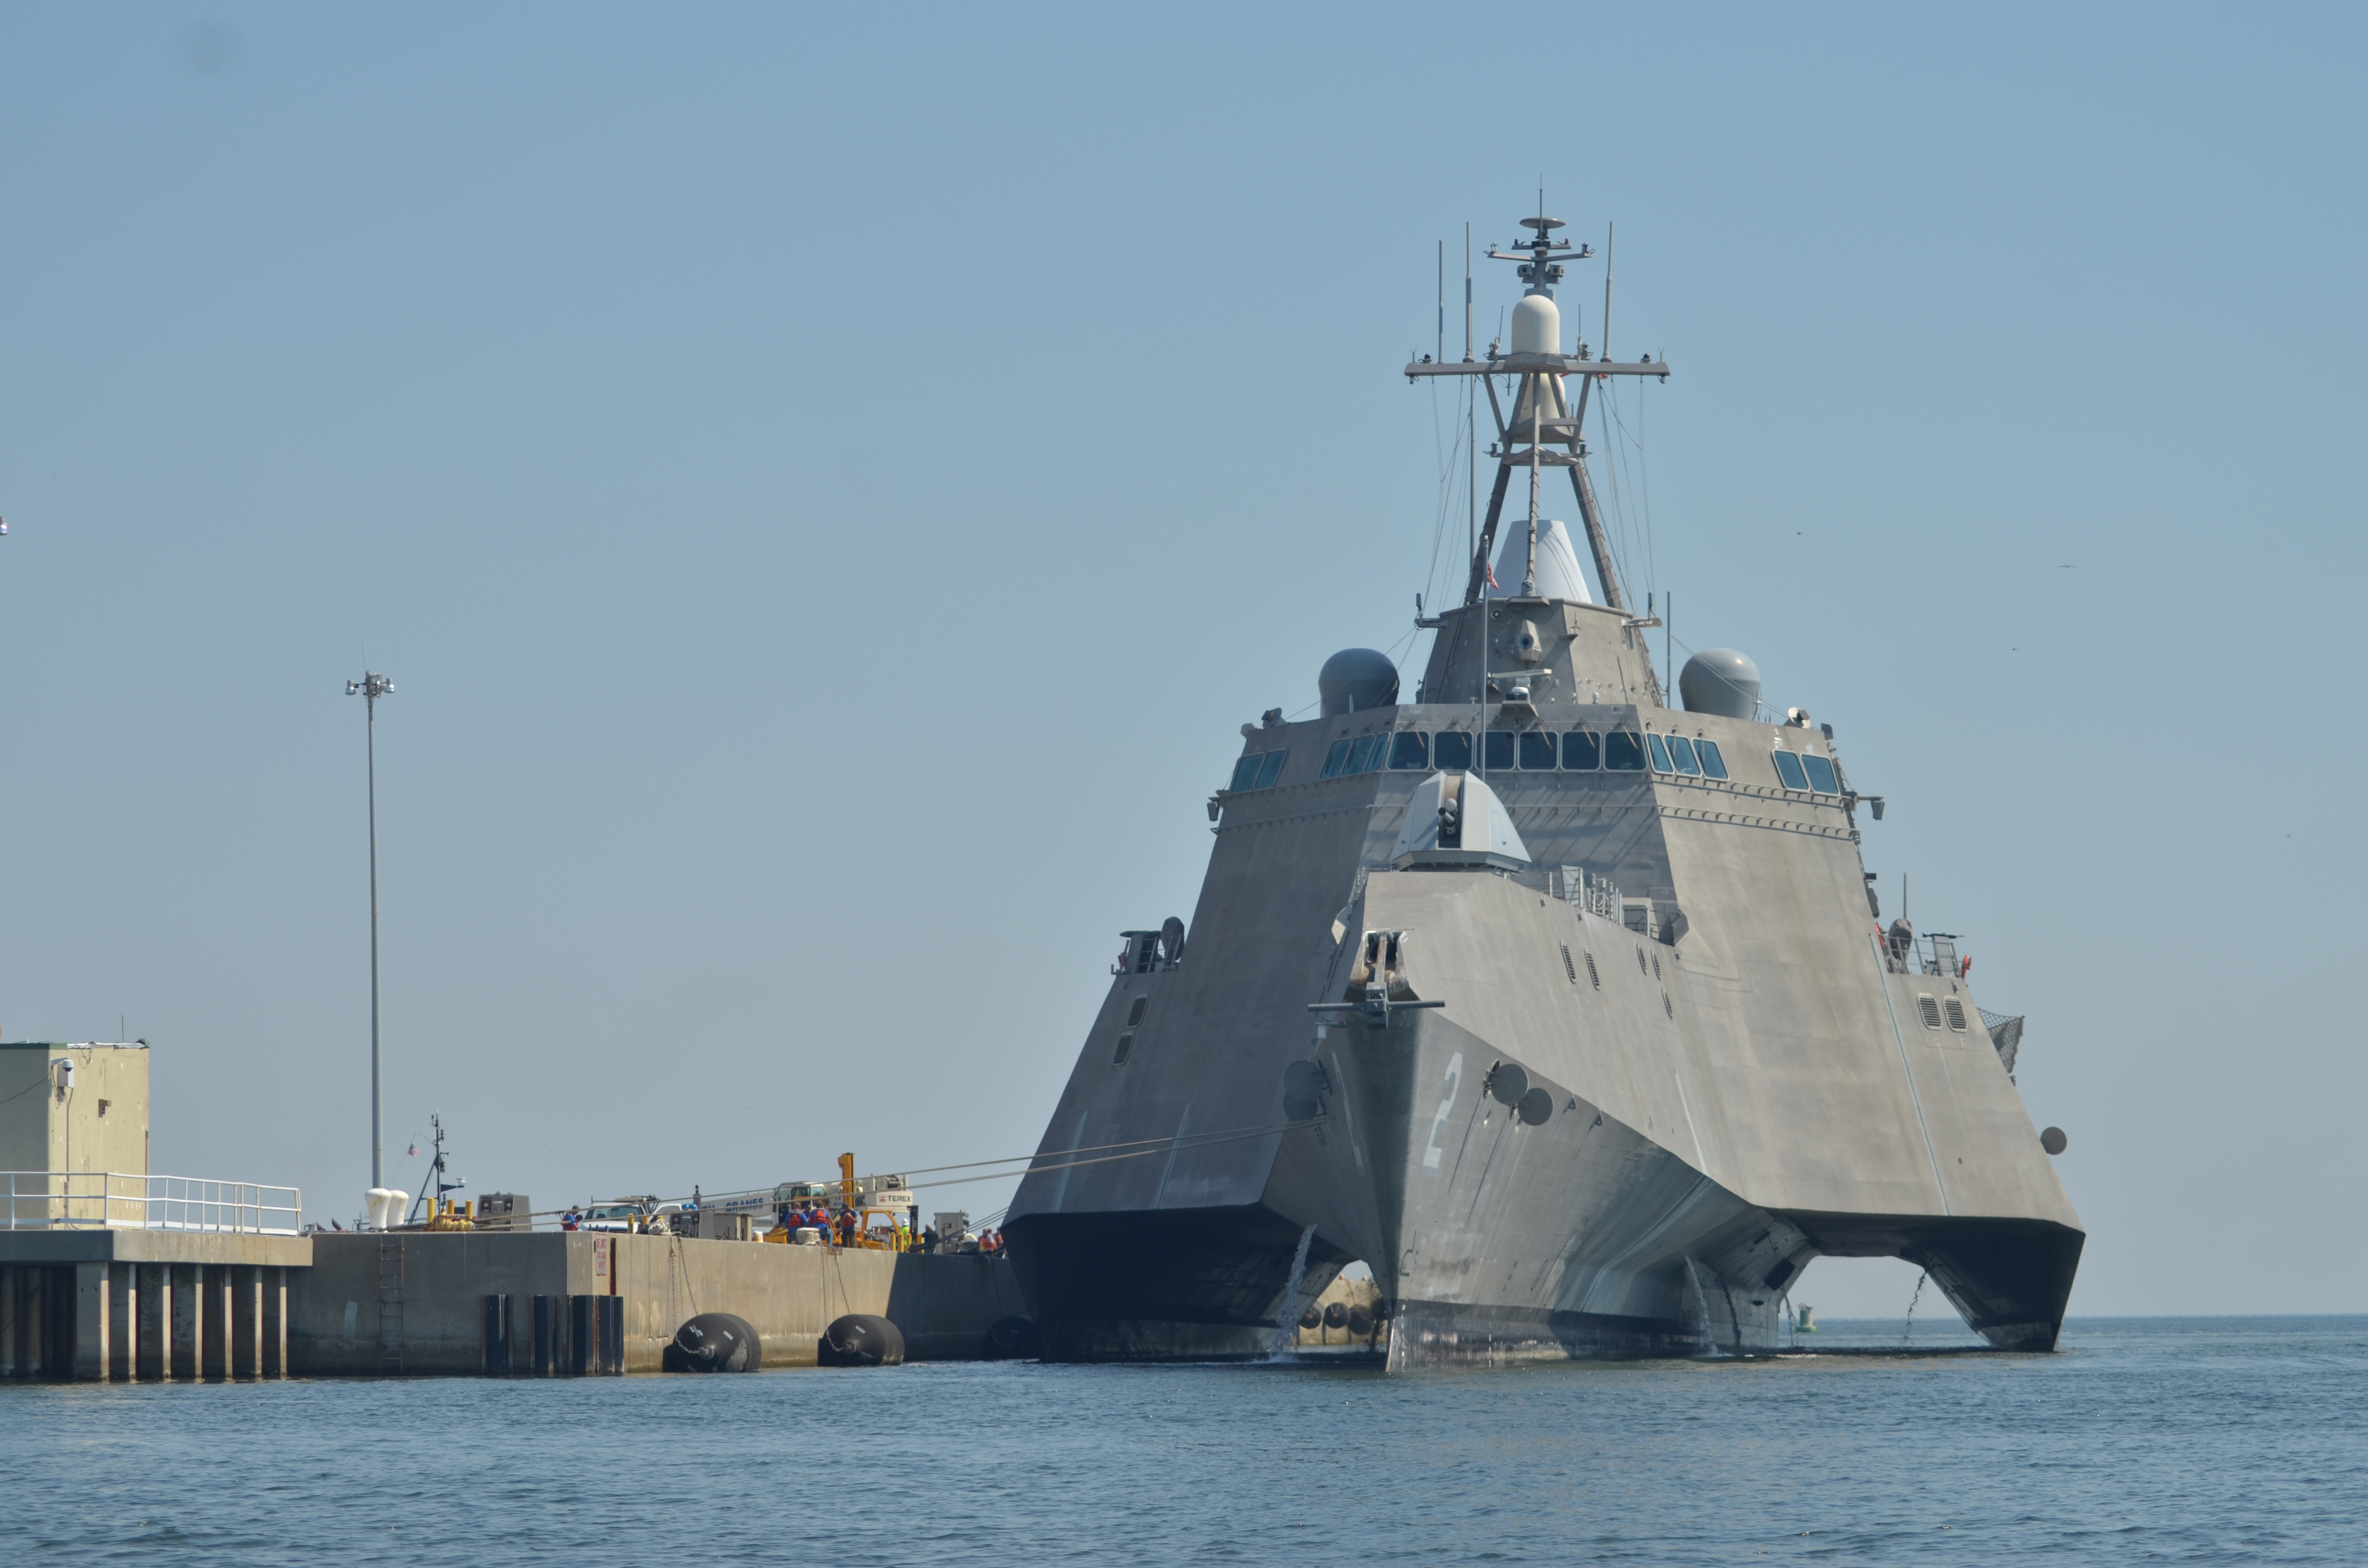 US_Navy_110912-N-AU606-002_The_littoral_combat_ship_USS_Independence_(LCS_2)_makes_preparations_at_Naval_Air_Station_Pensacola_before_getting_under.jpg